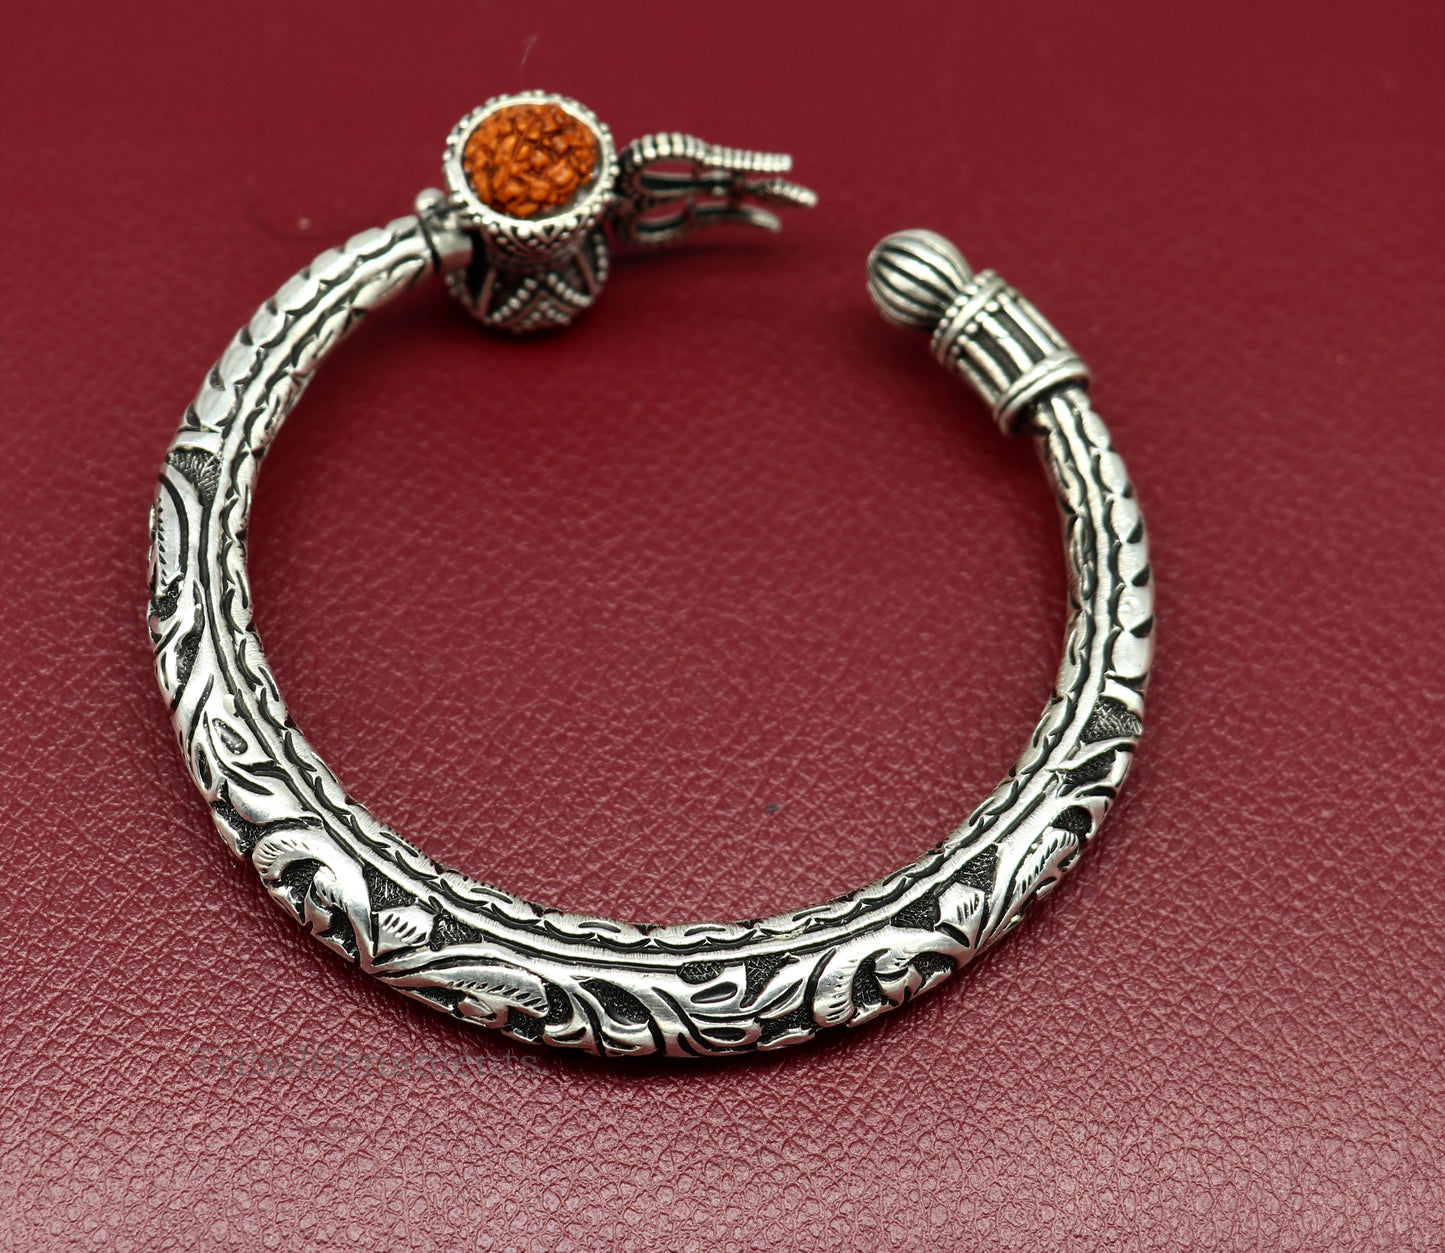 925 sterling silver customized Shiva trident stunning bangle men's bracelet, excellent Nakshi work men's gifting jewelry from India nssk392 - TRIBAL ORNAMENTS